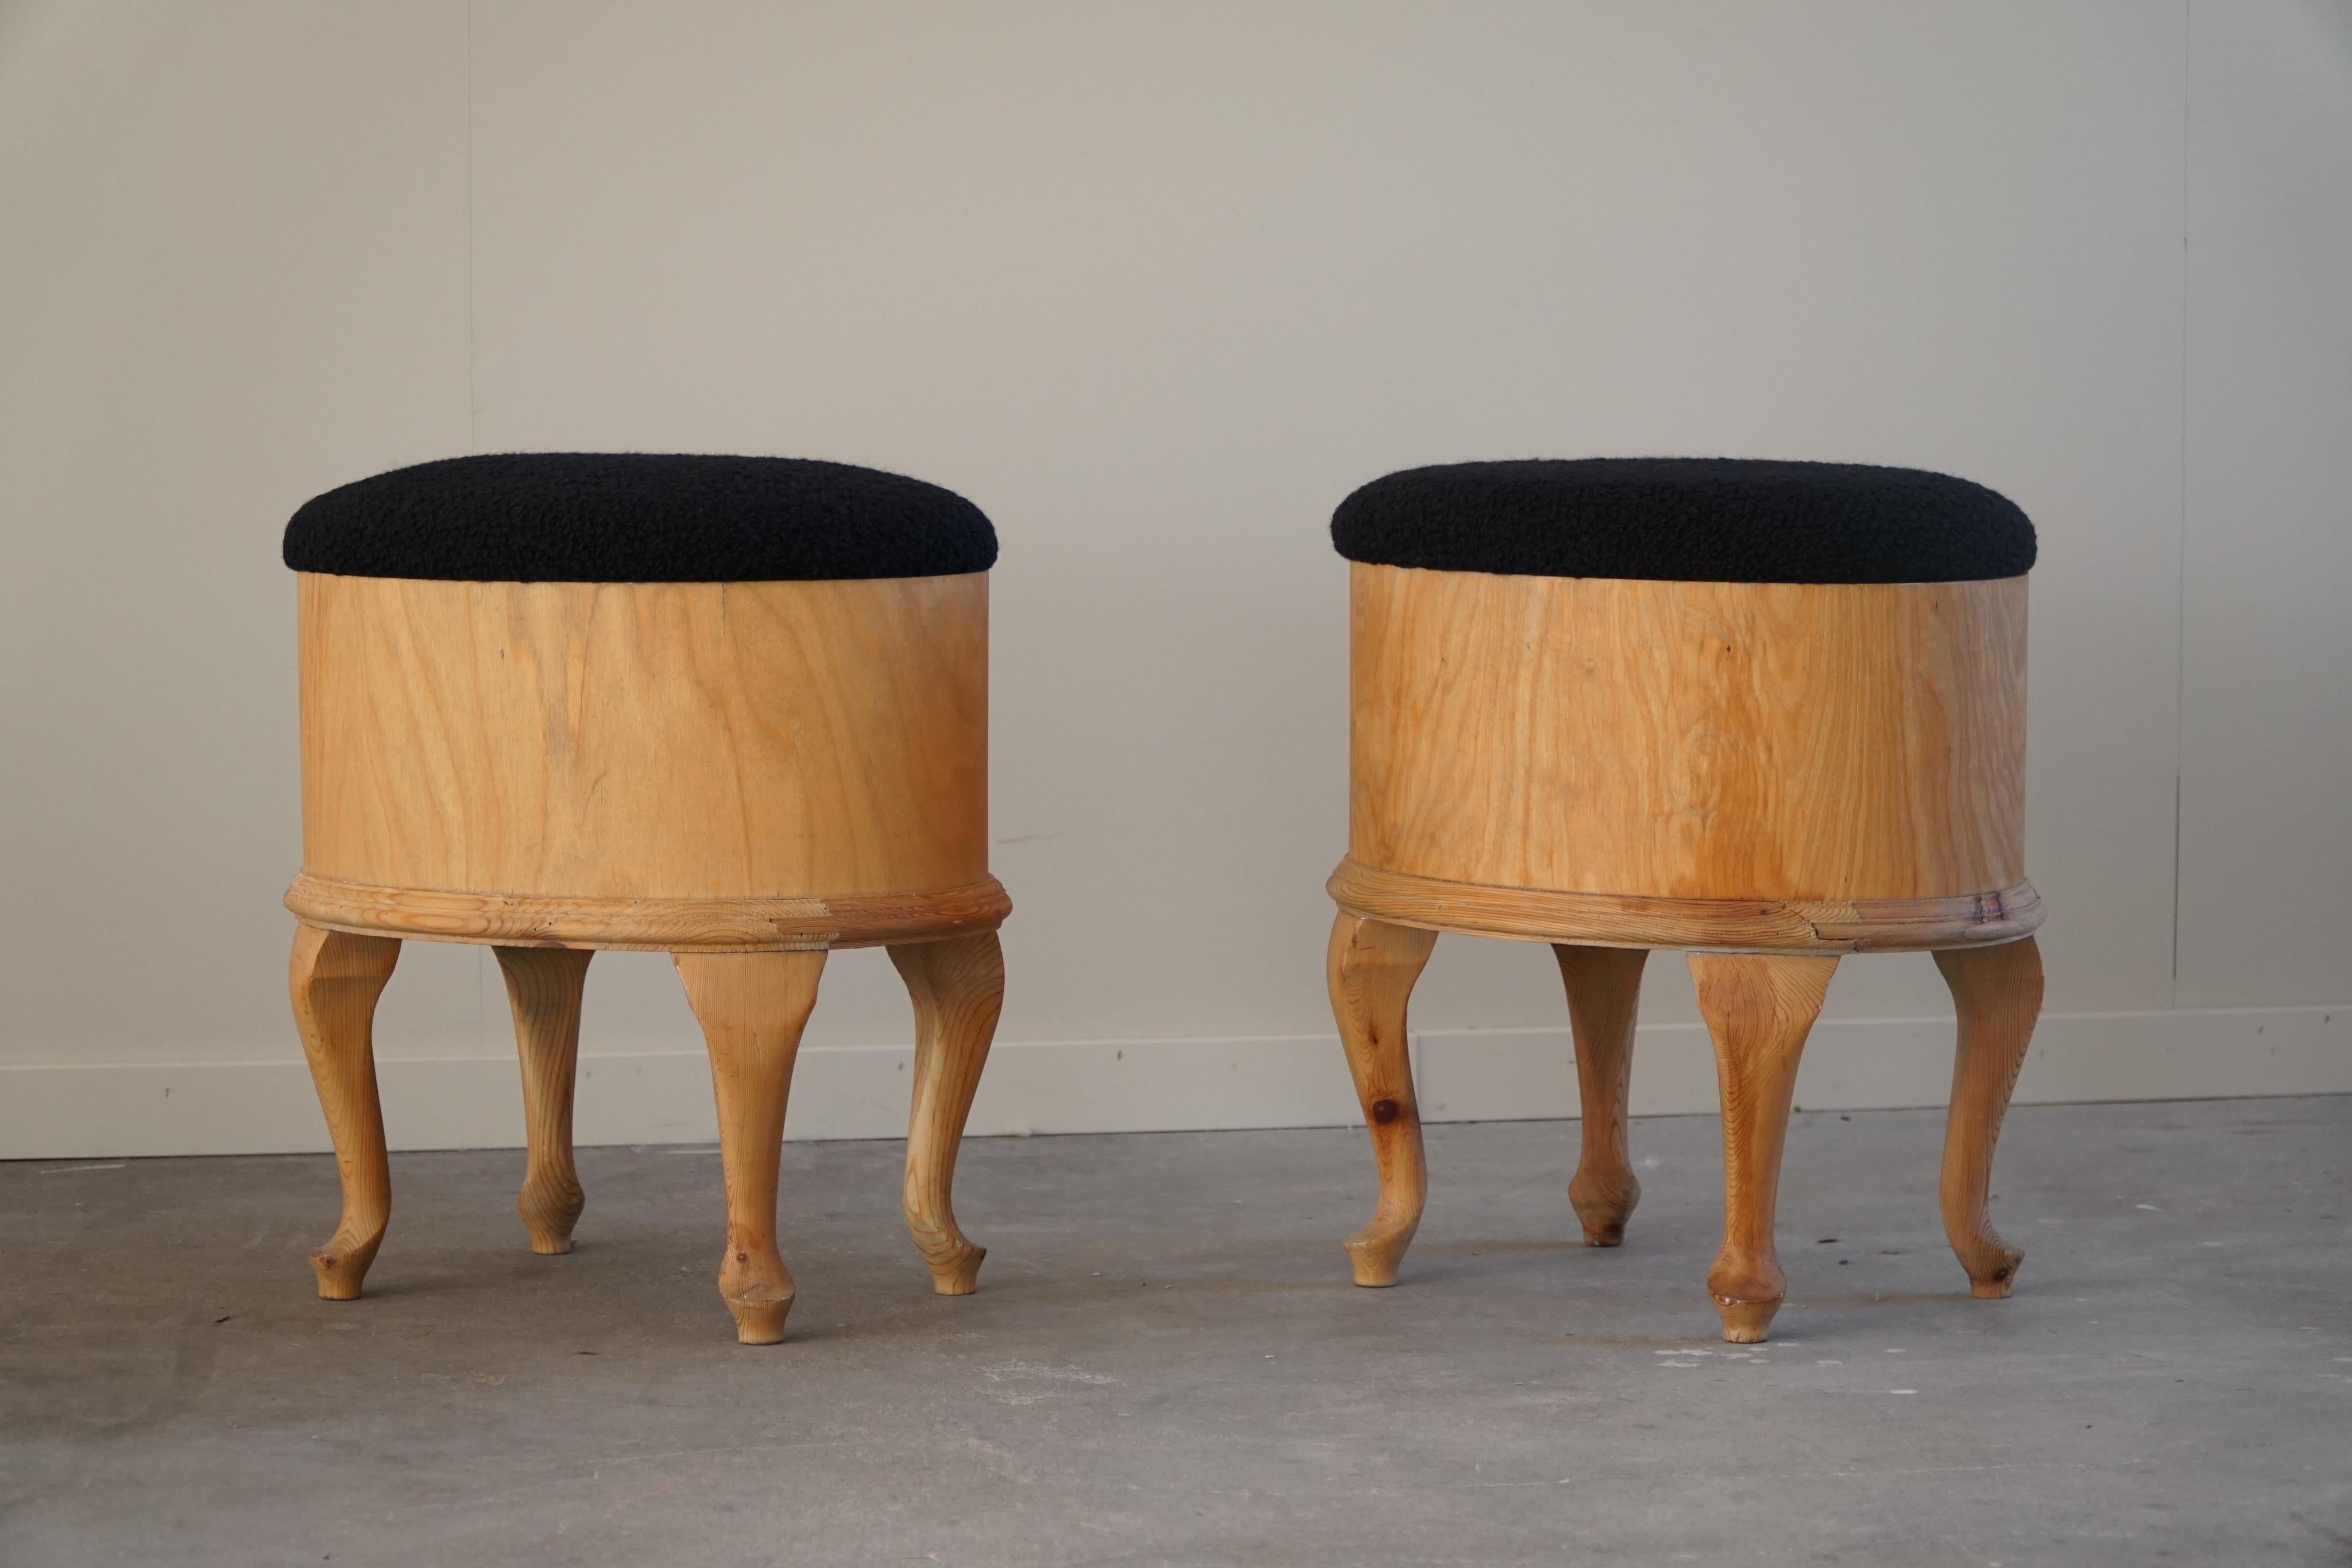 Pair of Stools with Storage in Pine and Reupholstered in Bouclé, Danish Modern 1